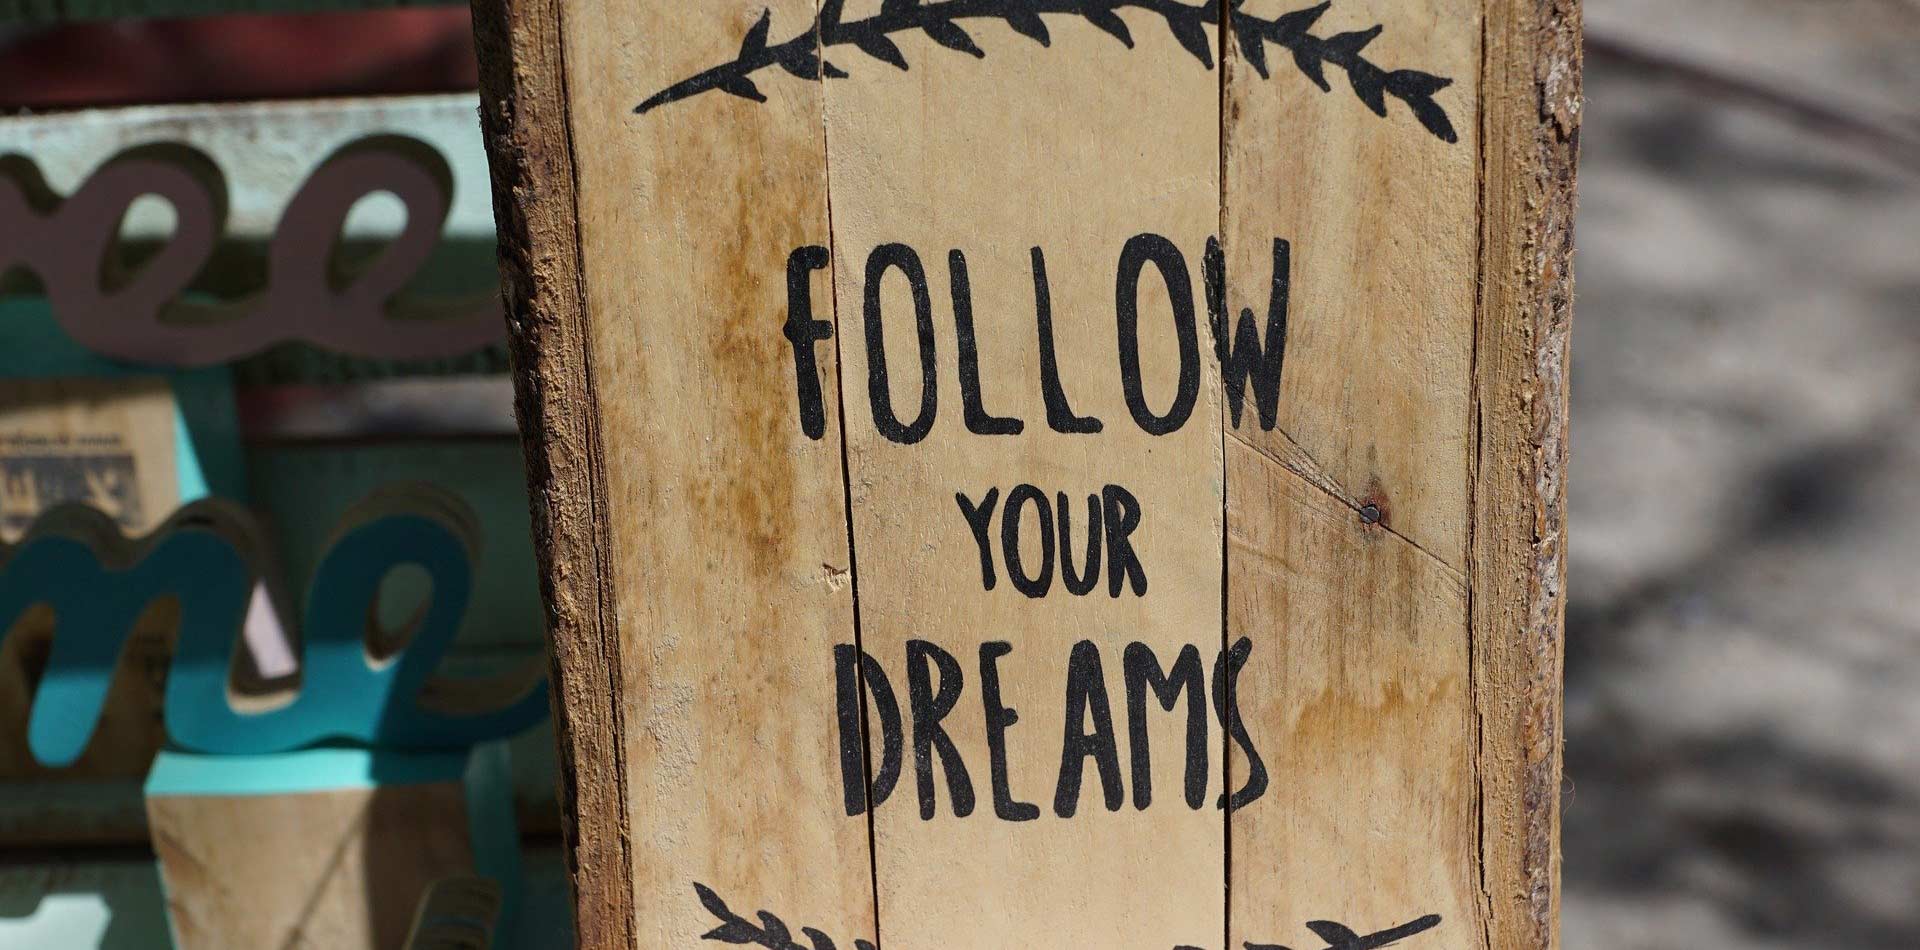 A sign carved into wood saying "follow your dreams"